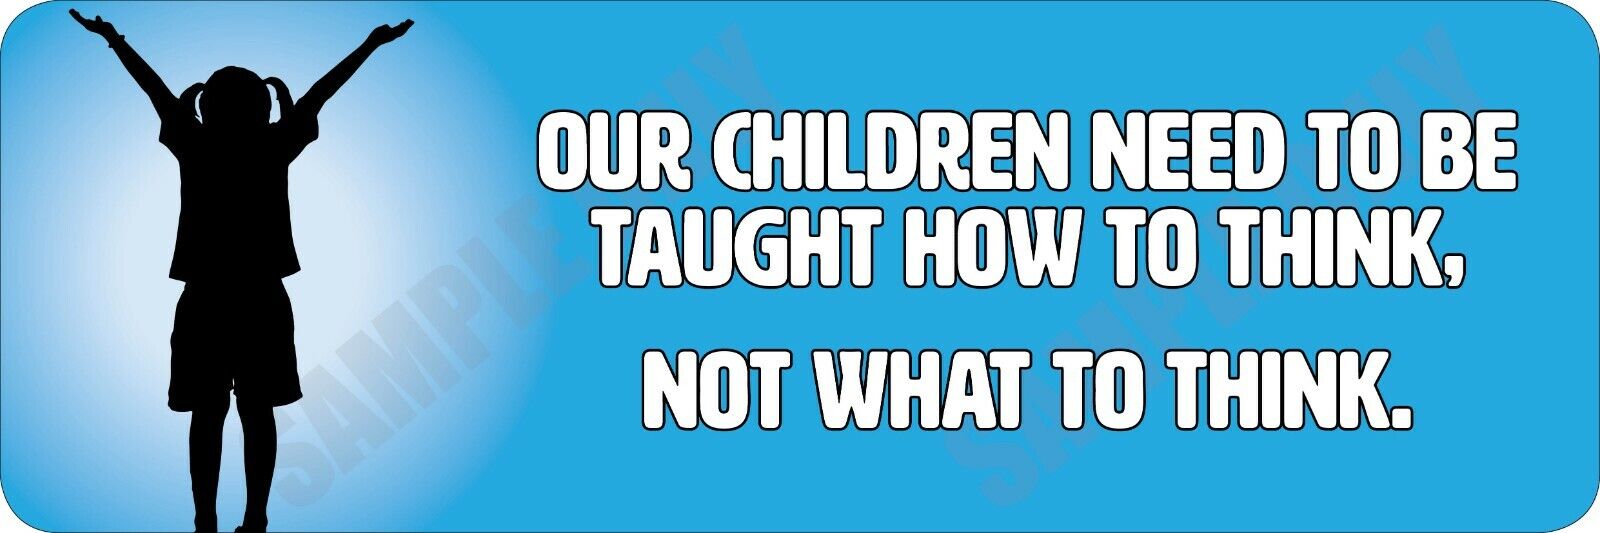 How to Think - Not What to Think V2 Bumper sticker 